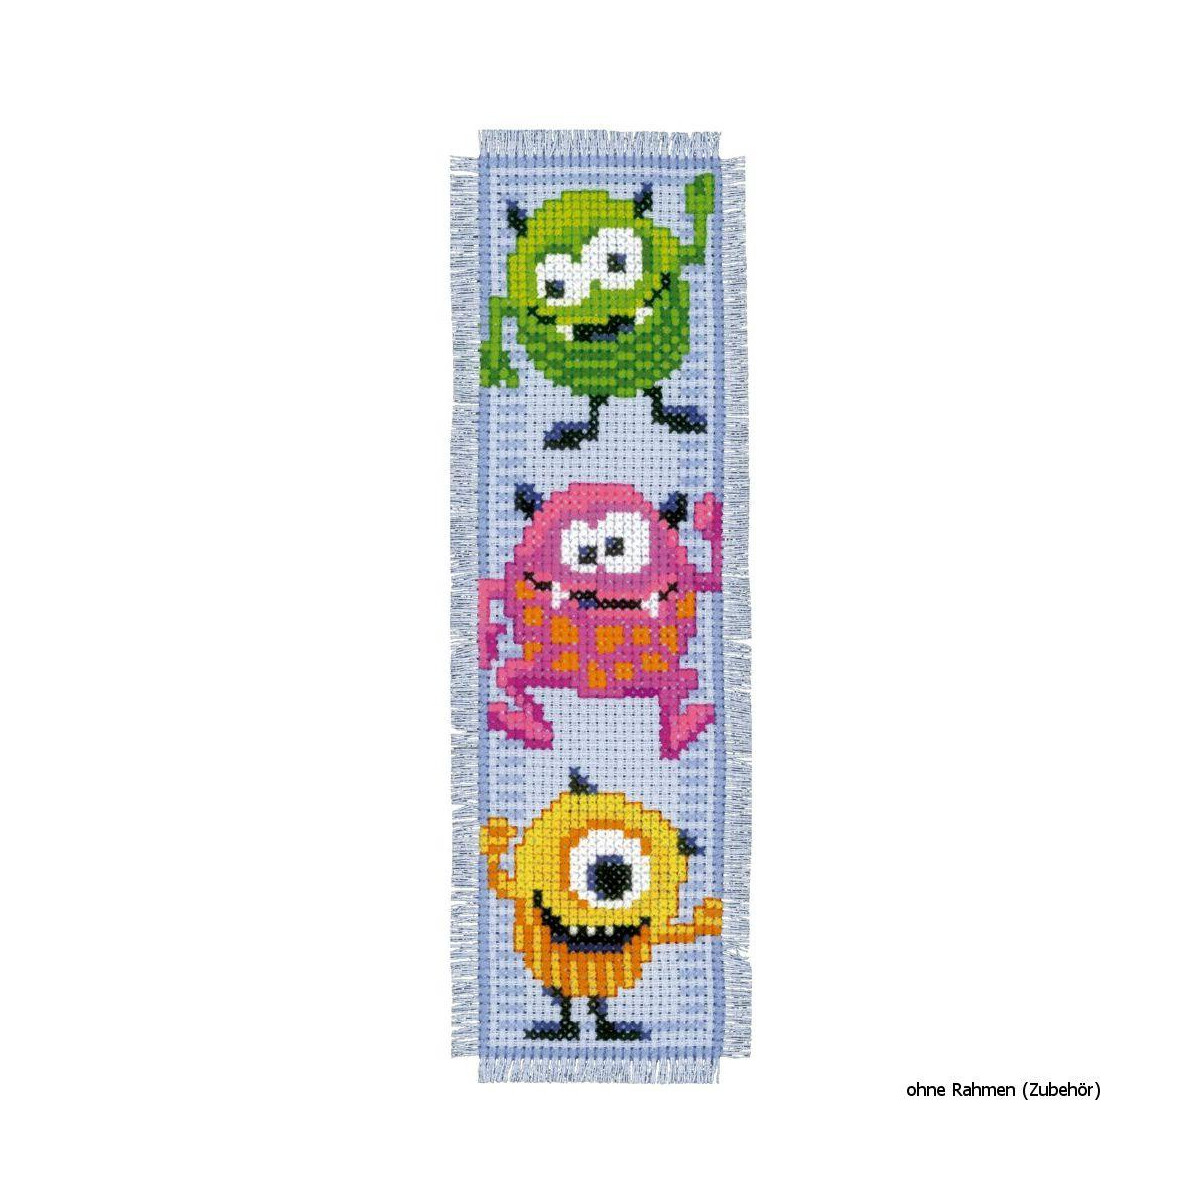 Vervaco Bookmark counted cross stitch kit Little monsters...